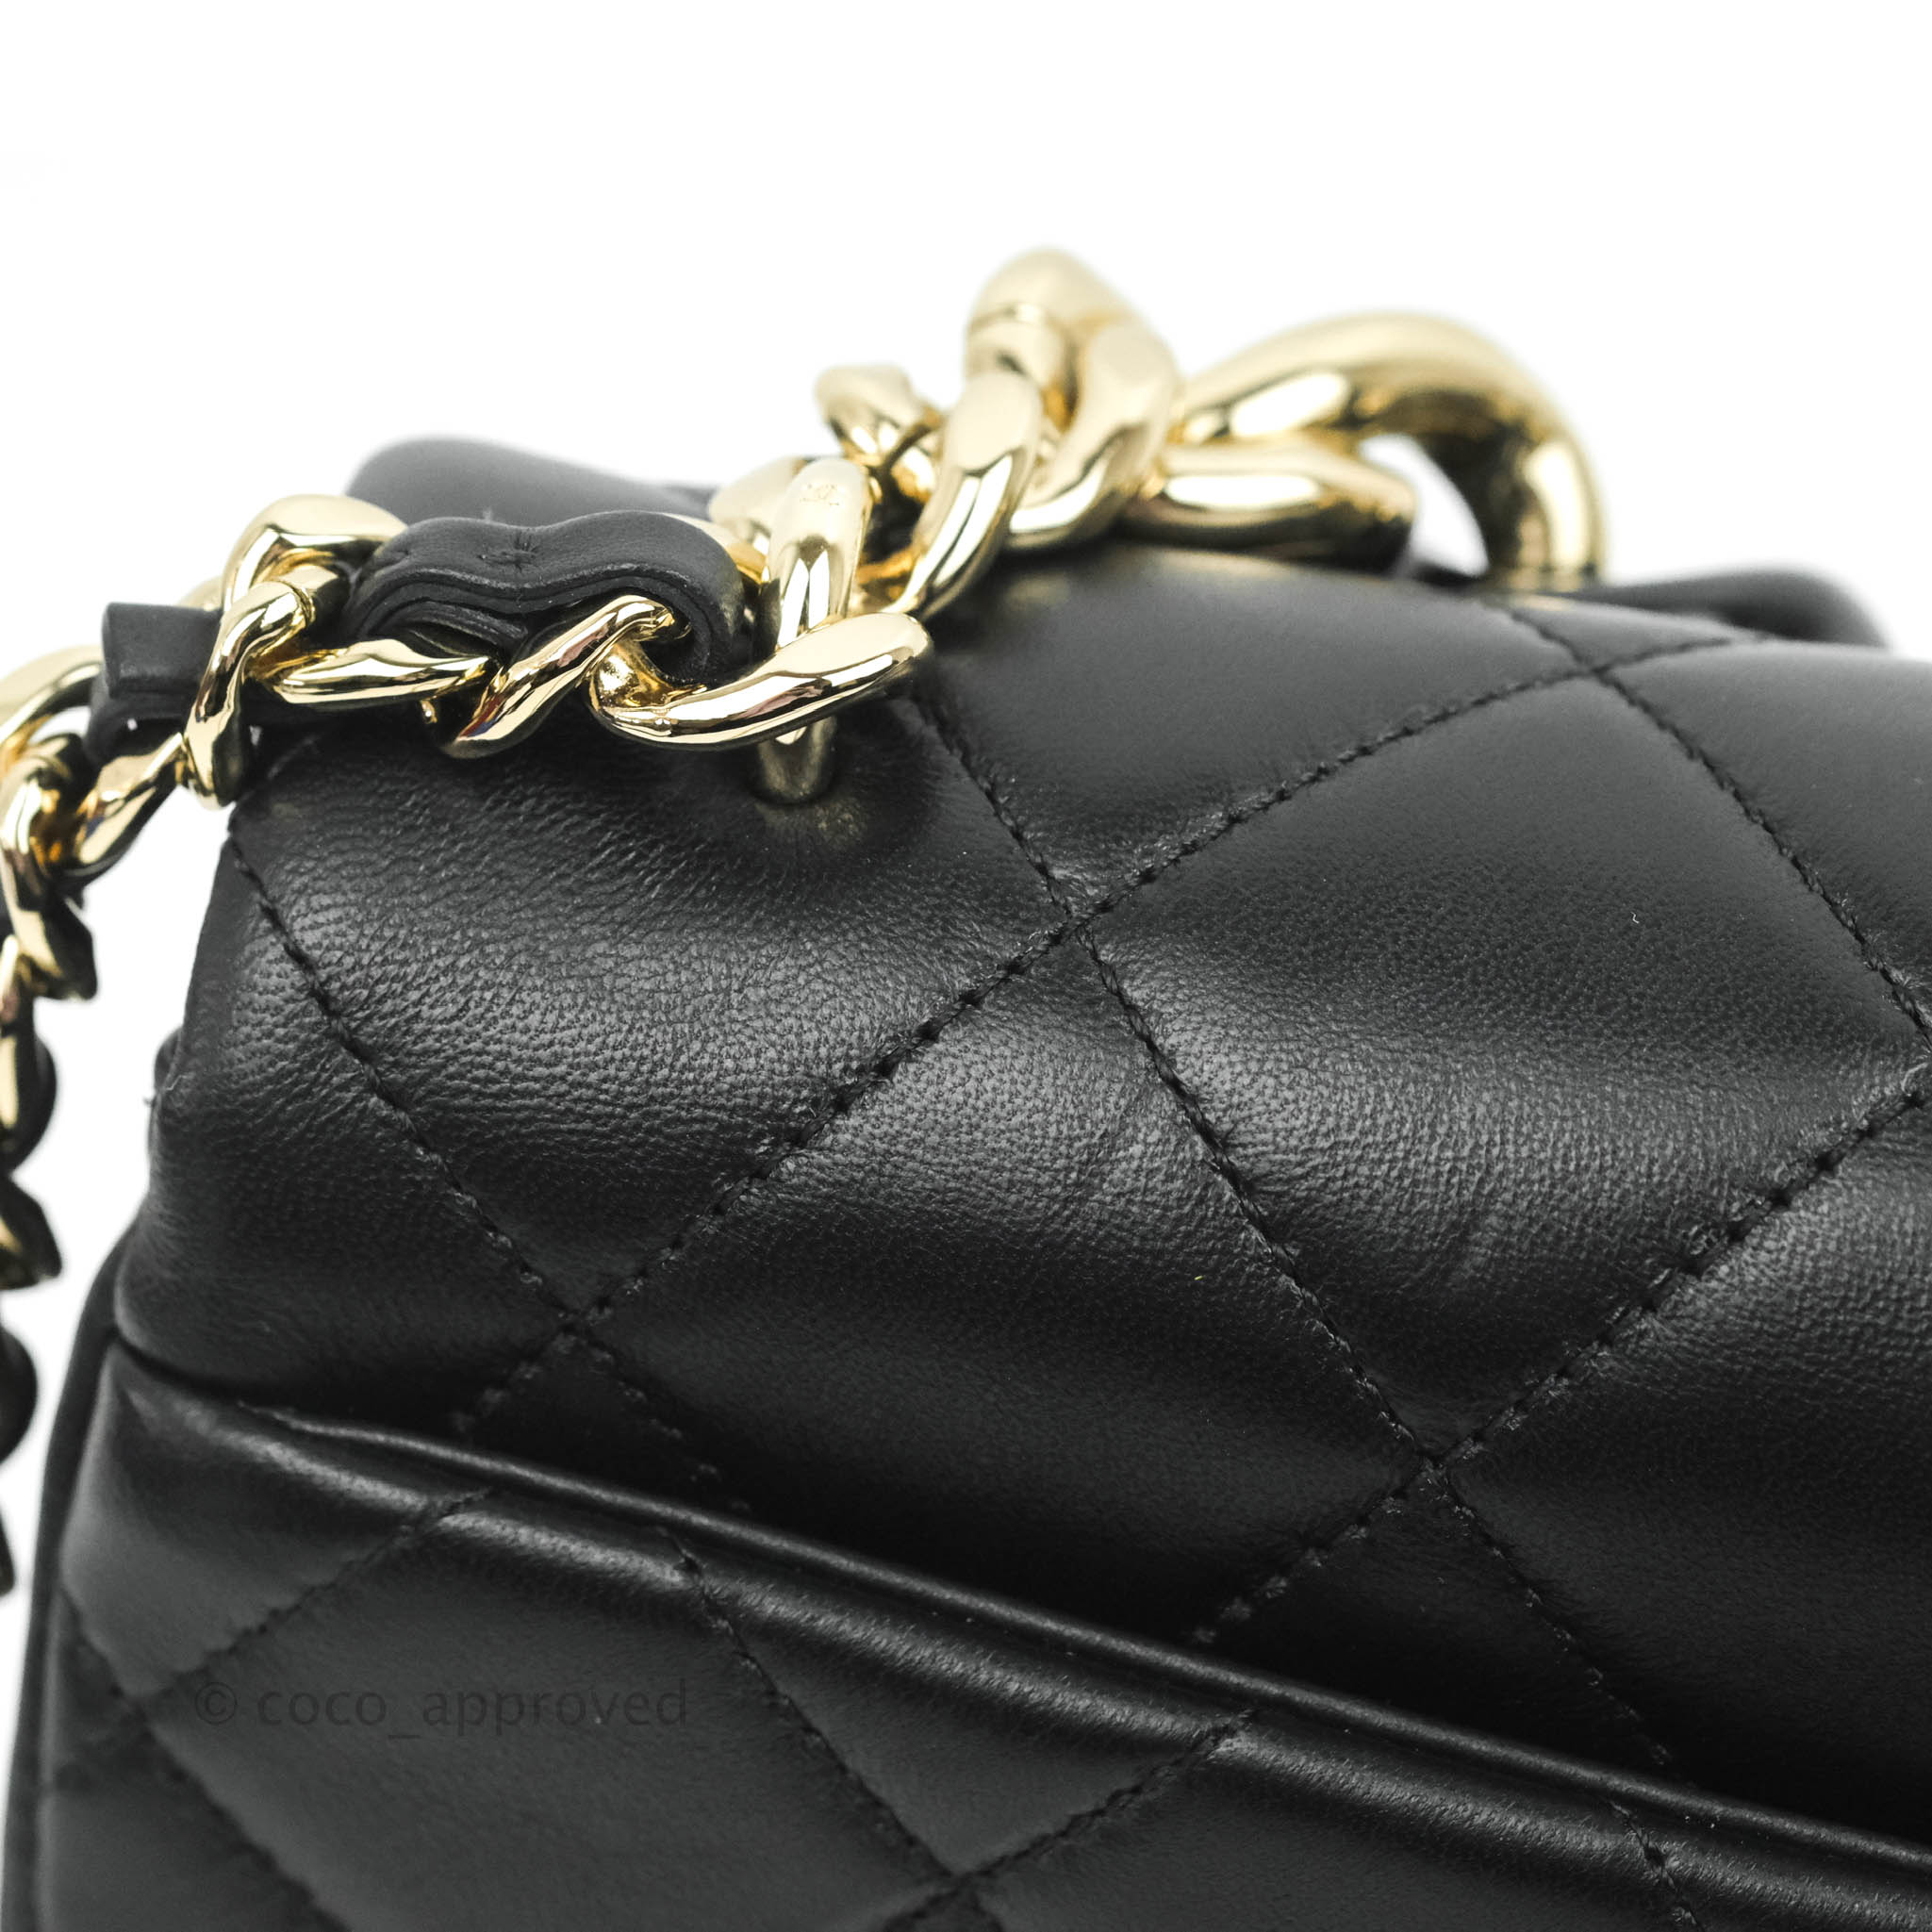 CHANEL Lambskin Quilted Resin Bi-Color Chain Flap Bag Black 523501